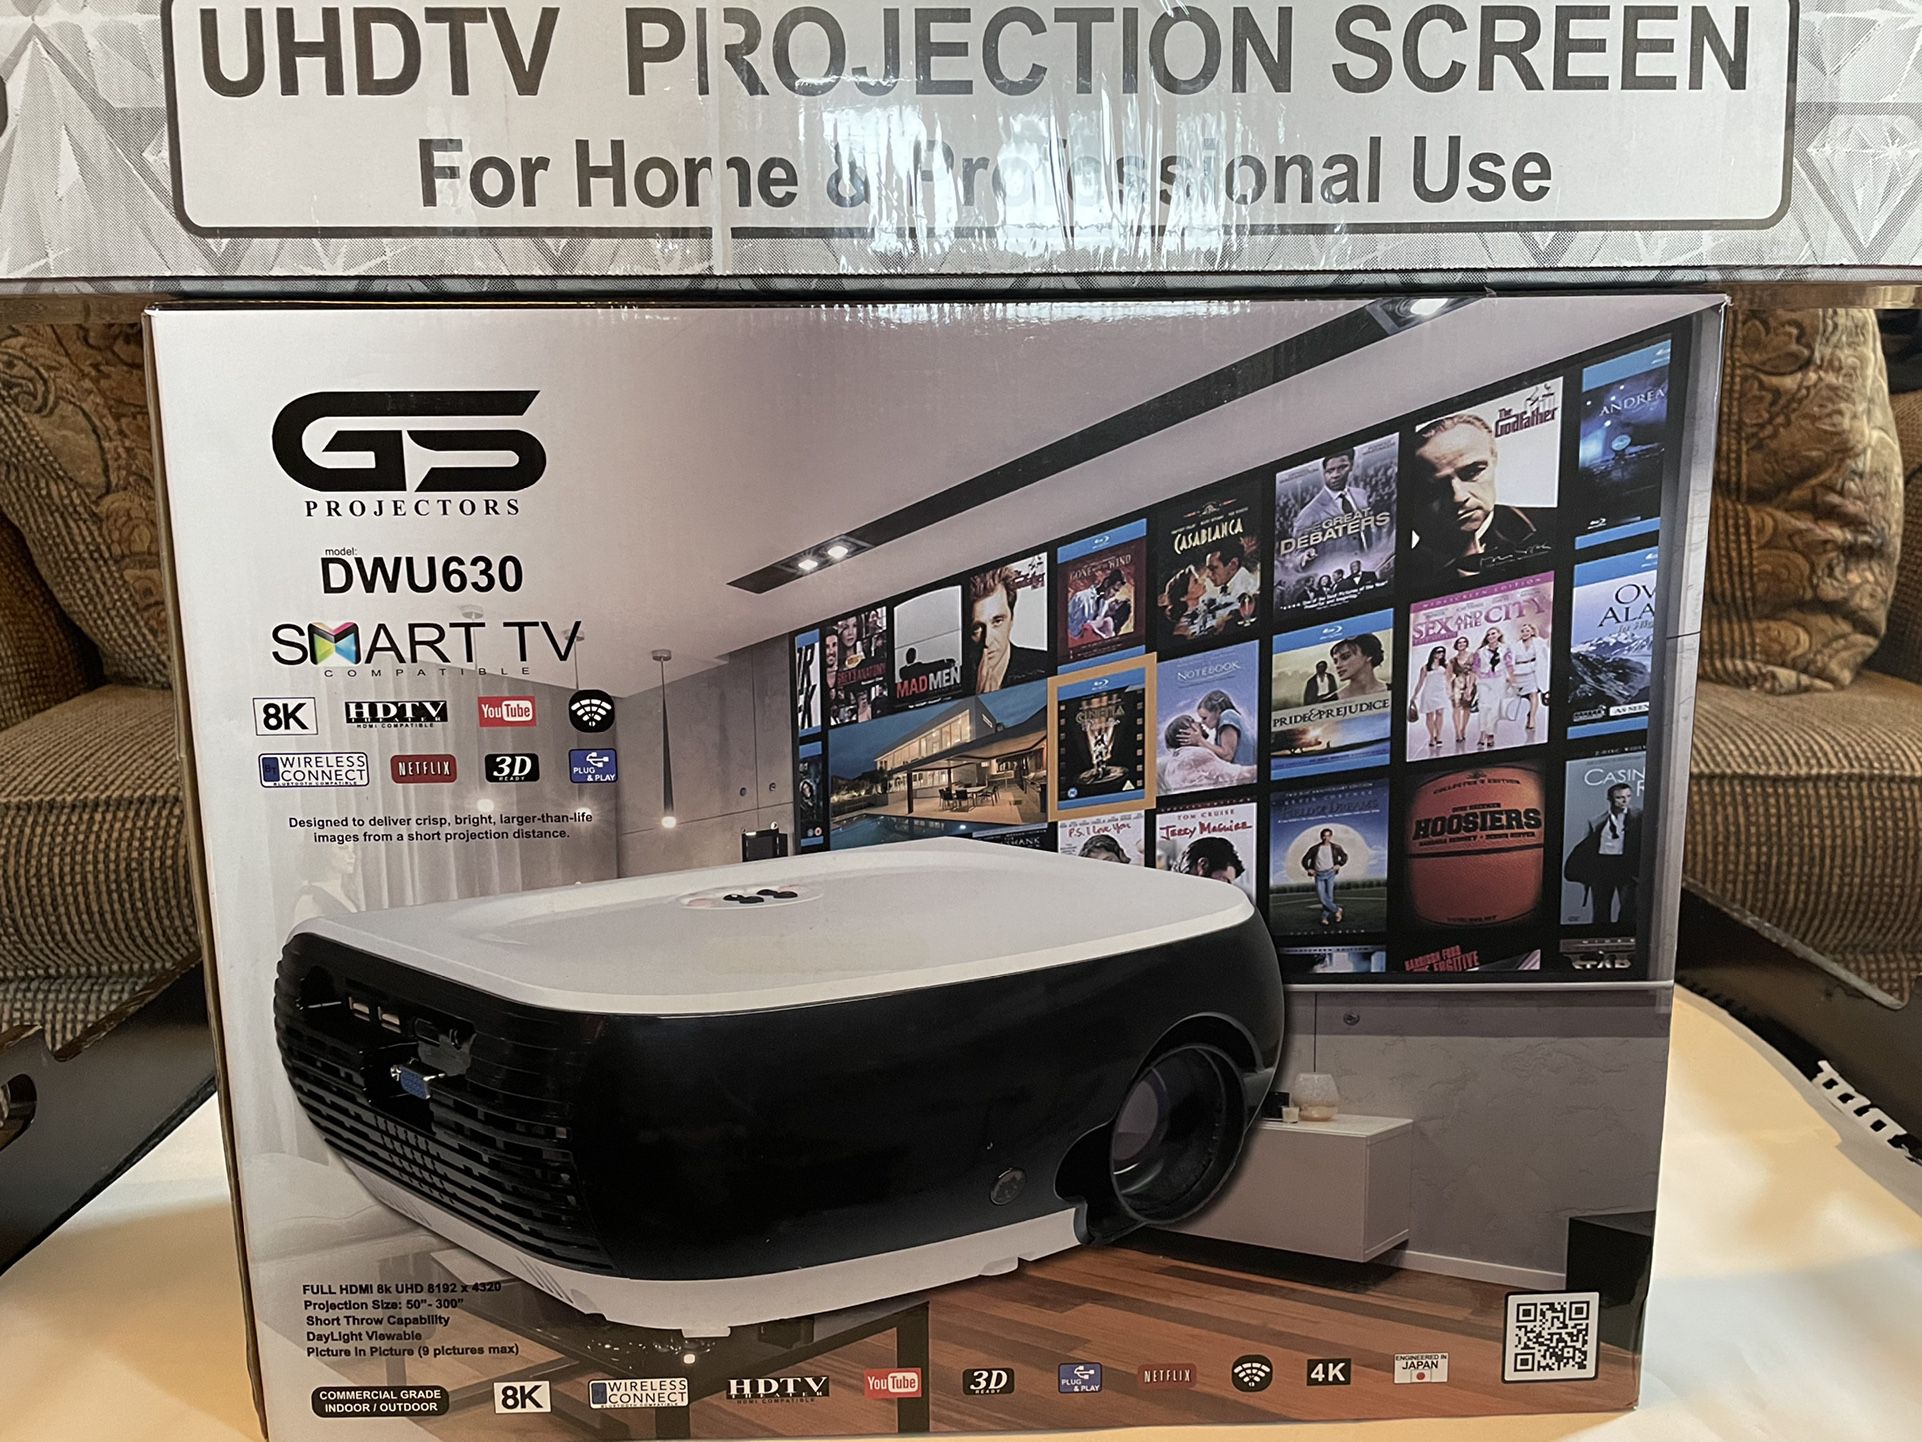 DWU630 Projector And UHFTV projection Screen